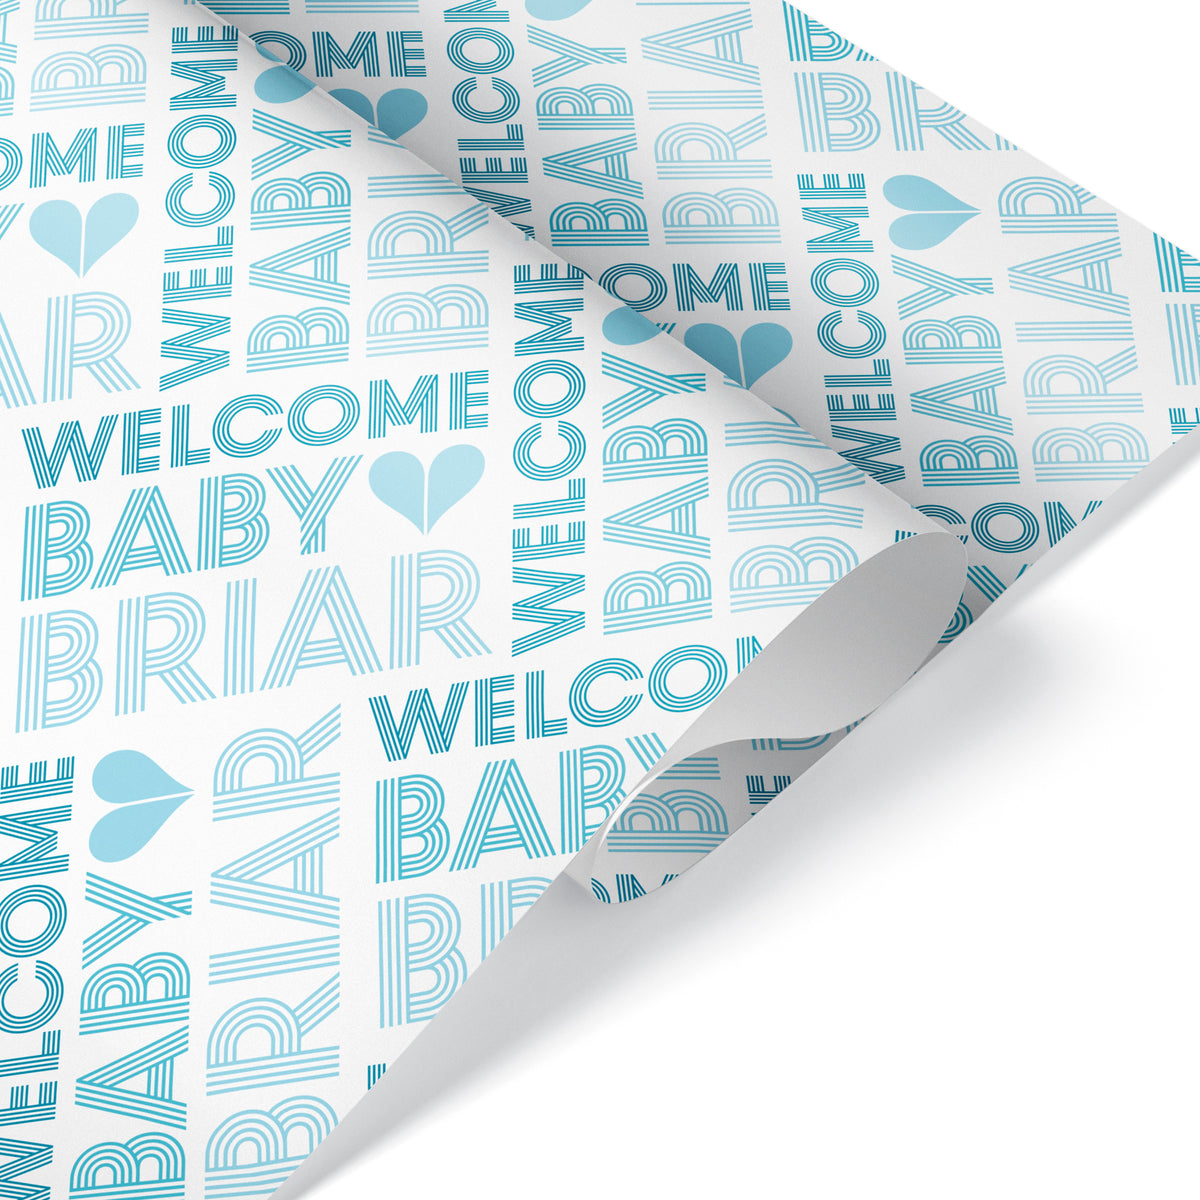 Baby Shower Personalized Wrapping Paper - BLUE